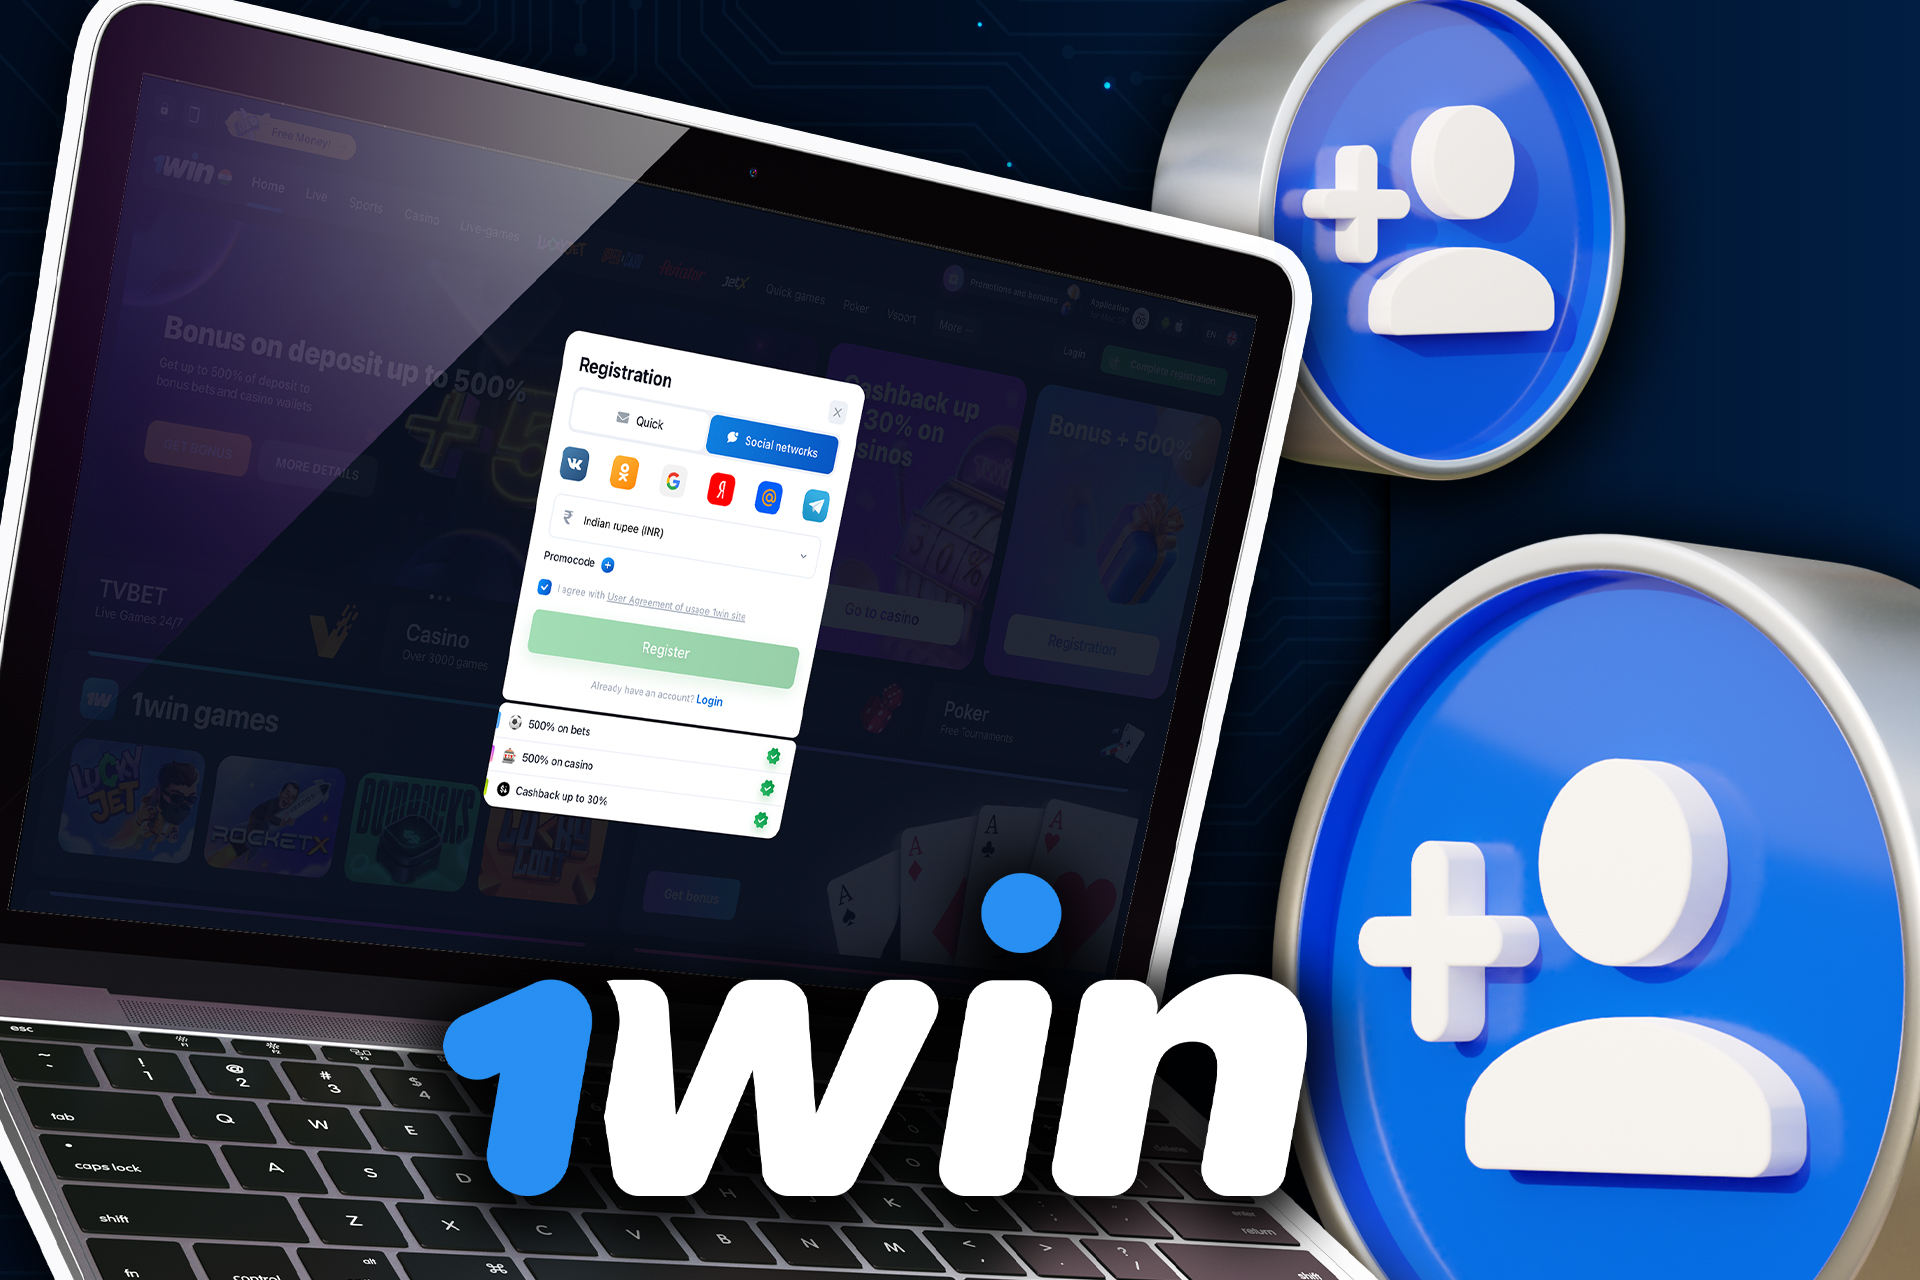 You can also register an account on 1win with the social media.